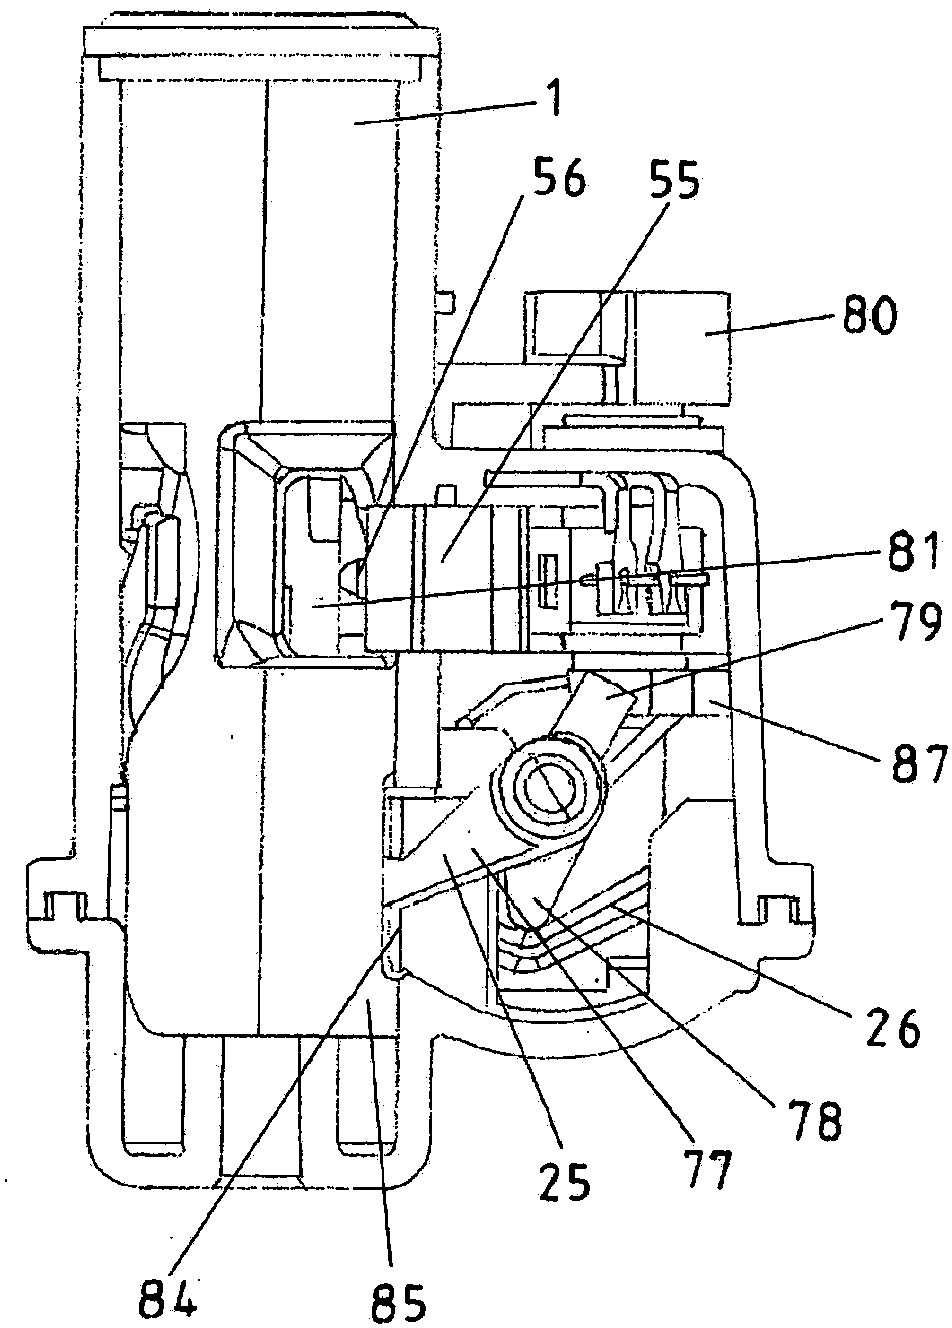 Fuel tank cap lock with a reduced number of components